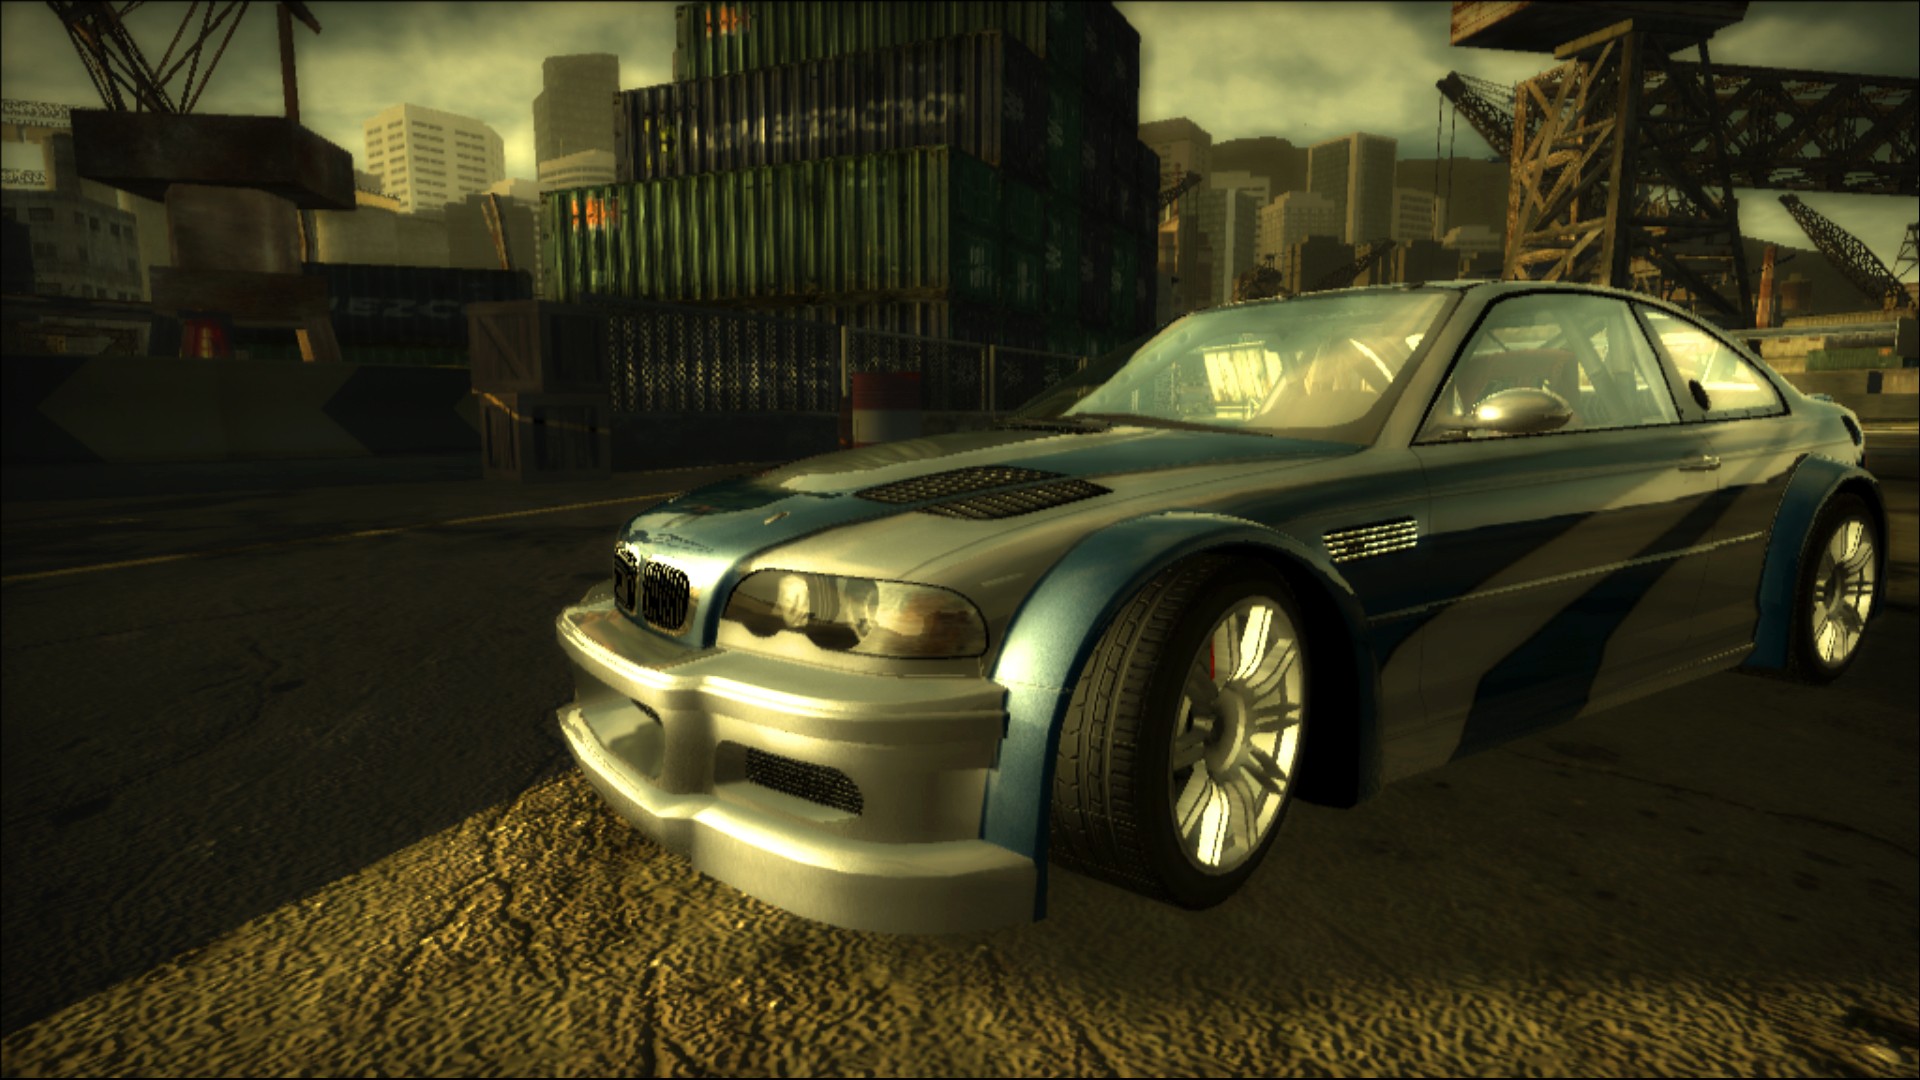 Песни из игры мост вантед. Игра NFS most wanted 2005. BMW m3 GTR. NFS most wanted 2005 мост. Need for Speed mostwanted 2005.